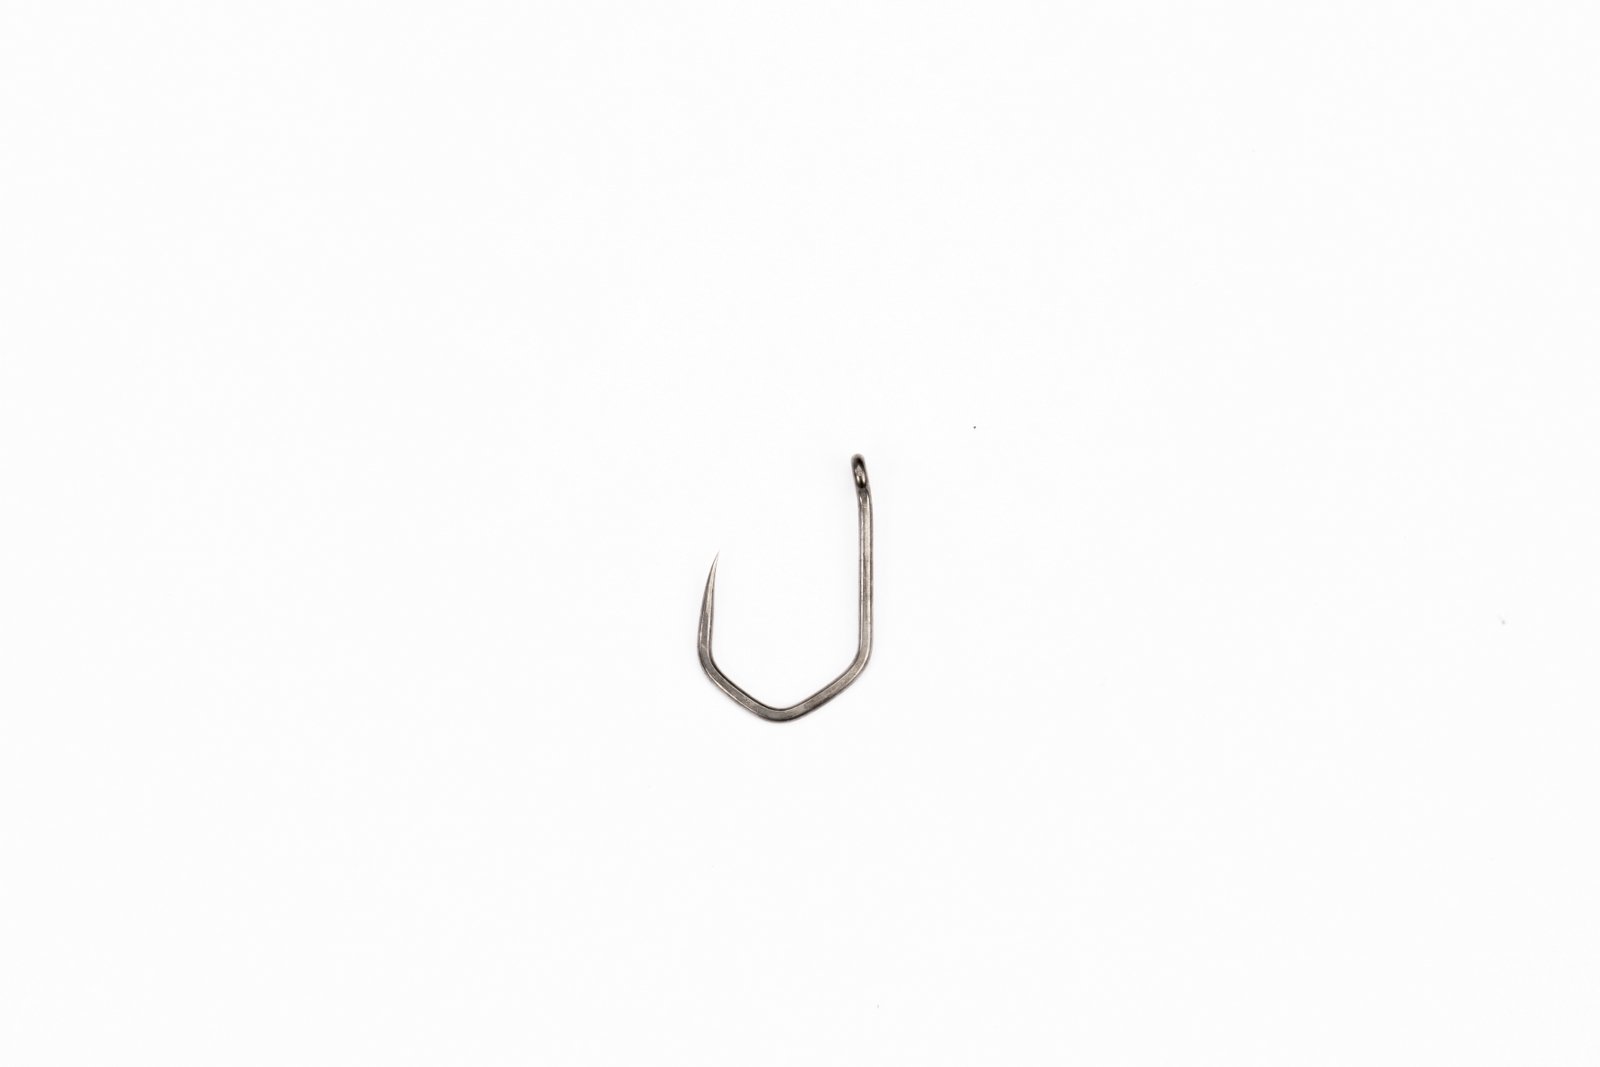 Nash Claw Size 8 Micro Barbed Hooks & Sharpening Tackle T6137 International Shop Europe